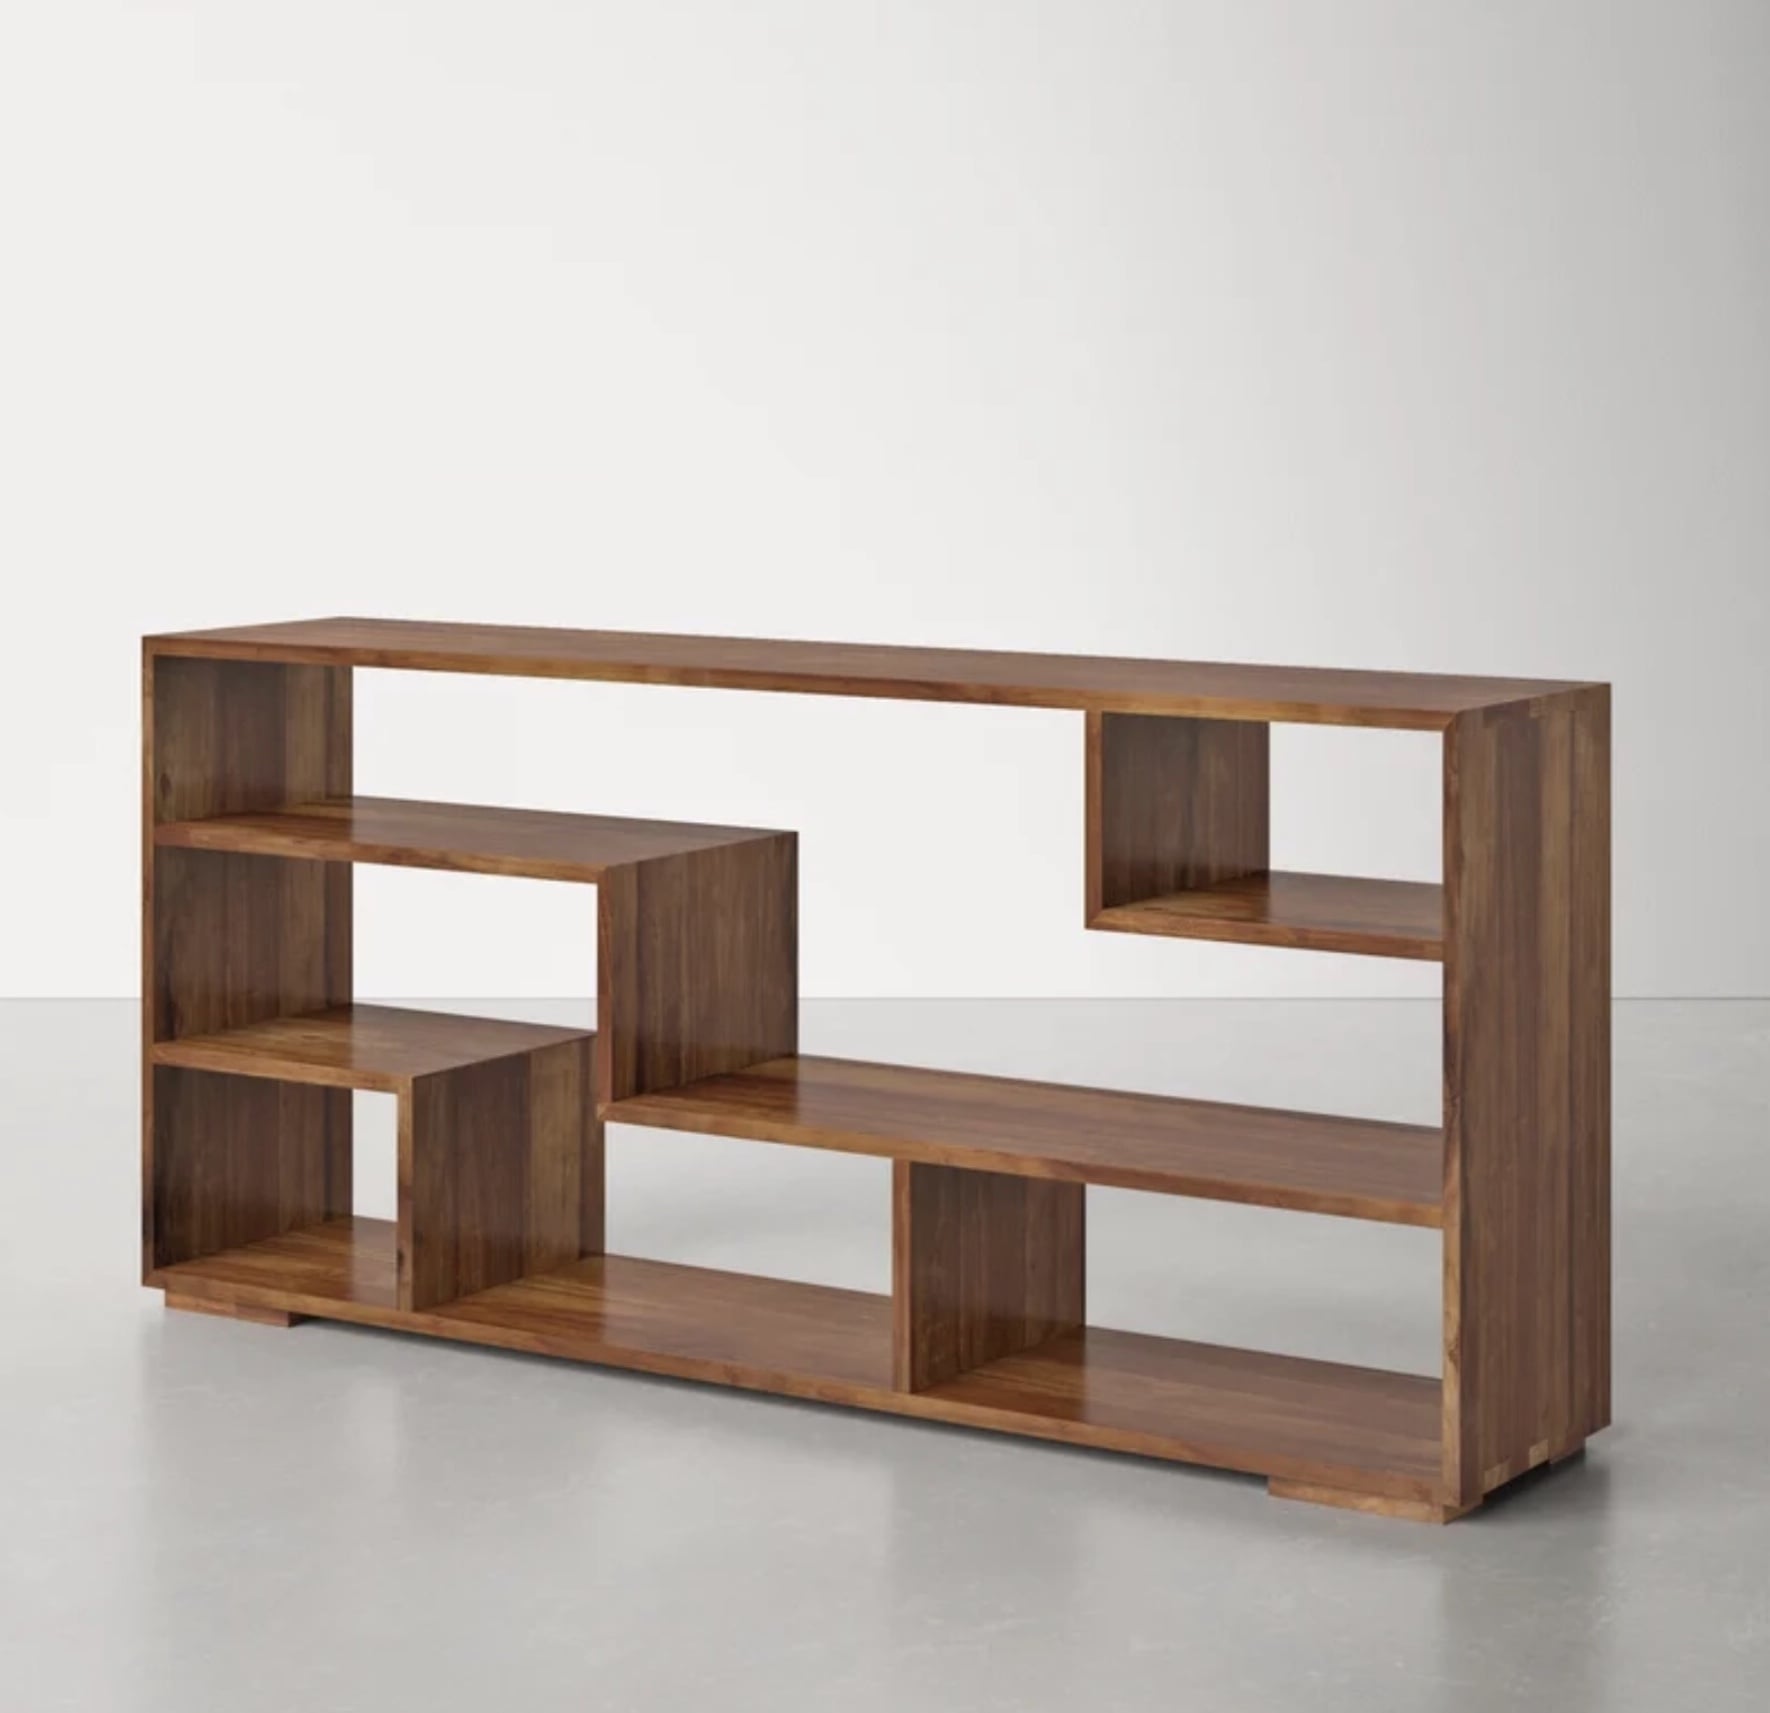 Made to Order Furniture. - Book Cases 035-01